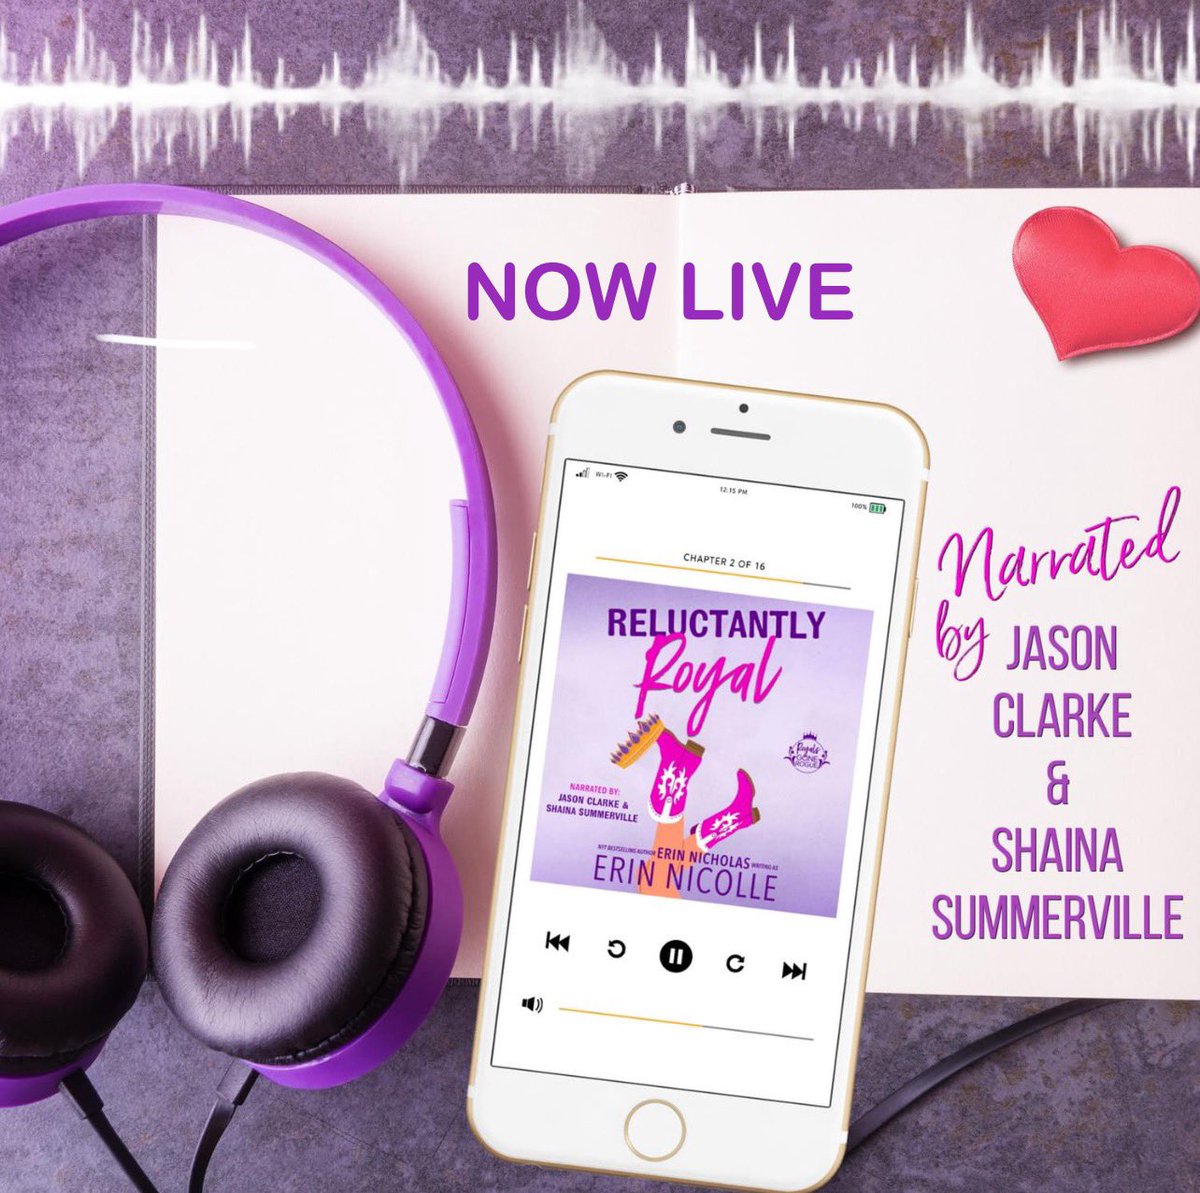 💜The 🎧AUDIOBOOK🎧 for Reluctantly Royal is LIVE!! 💜 Grab your copy today: Amazon ➜ geni.us/Reluctantly-Ro… Audible ➜ adbl.co/4bIi6yR @ErinNicholas #erinnicolle